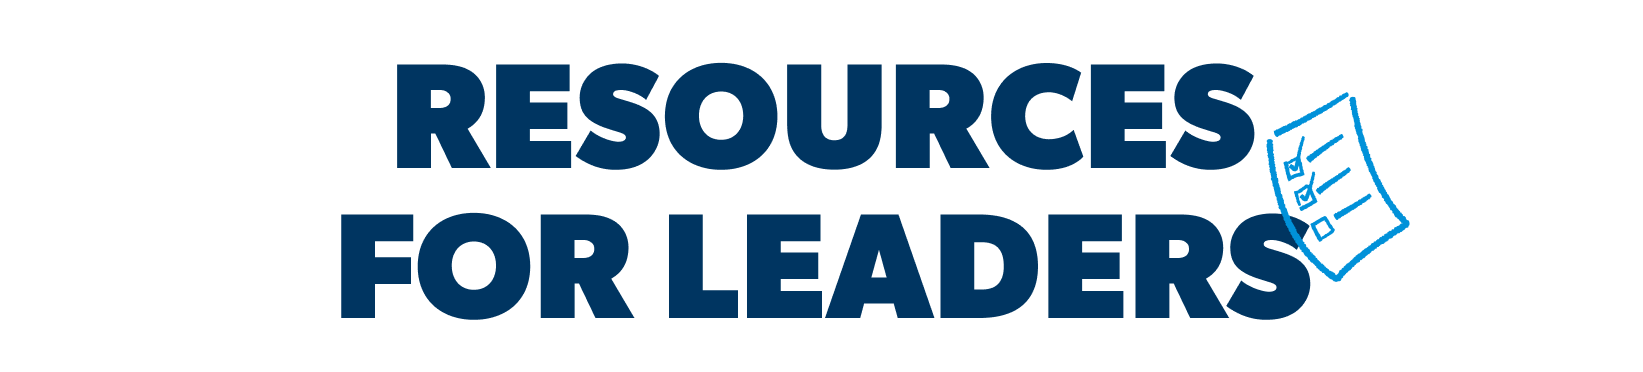 Free Resources For Leaders